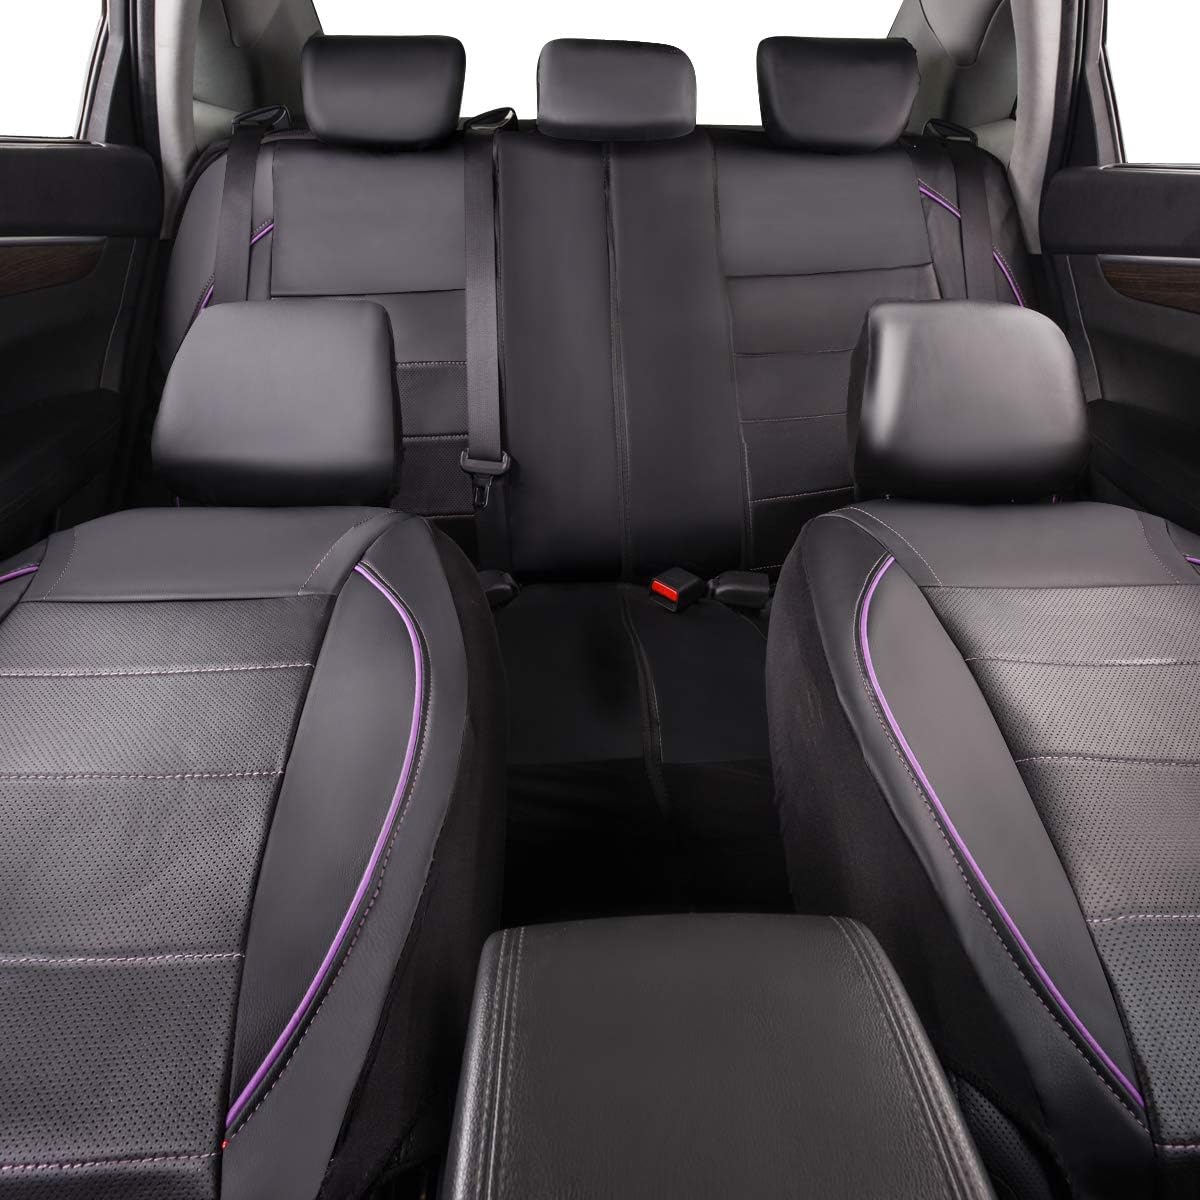 CAR PASS Universal FIT Piping Leather Car Seat Cover, for suvs,Van,Trucks,Airbag Compatible,Inside Zipper Design and Reserved Opening Holes (Full Set, Black and Purple)